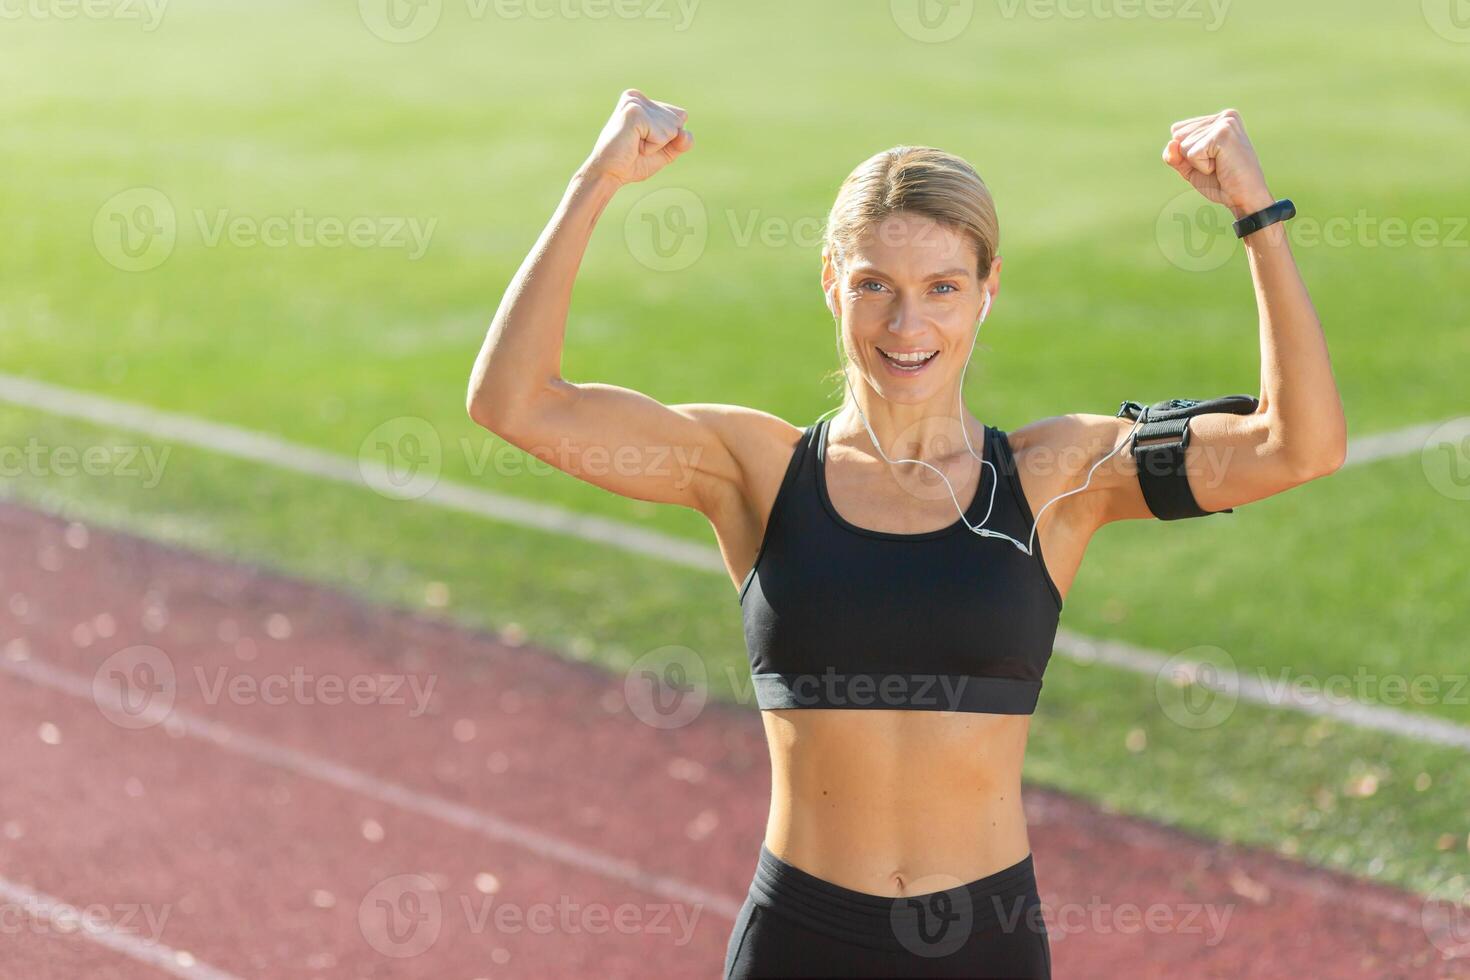 Energetic woman runner showing strength and success with a confident arm raise on a sunny athletic track. photo